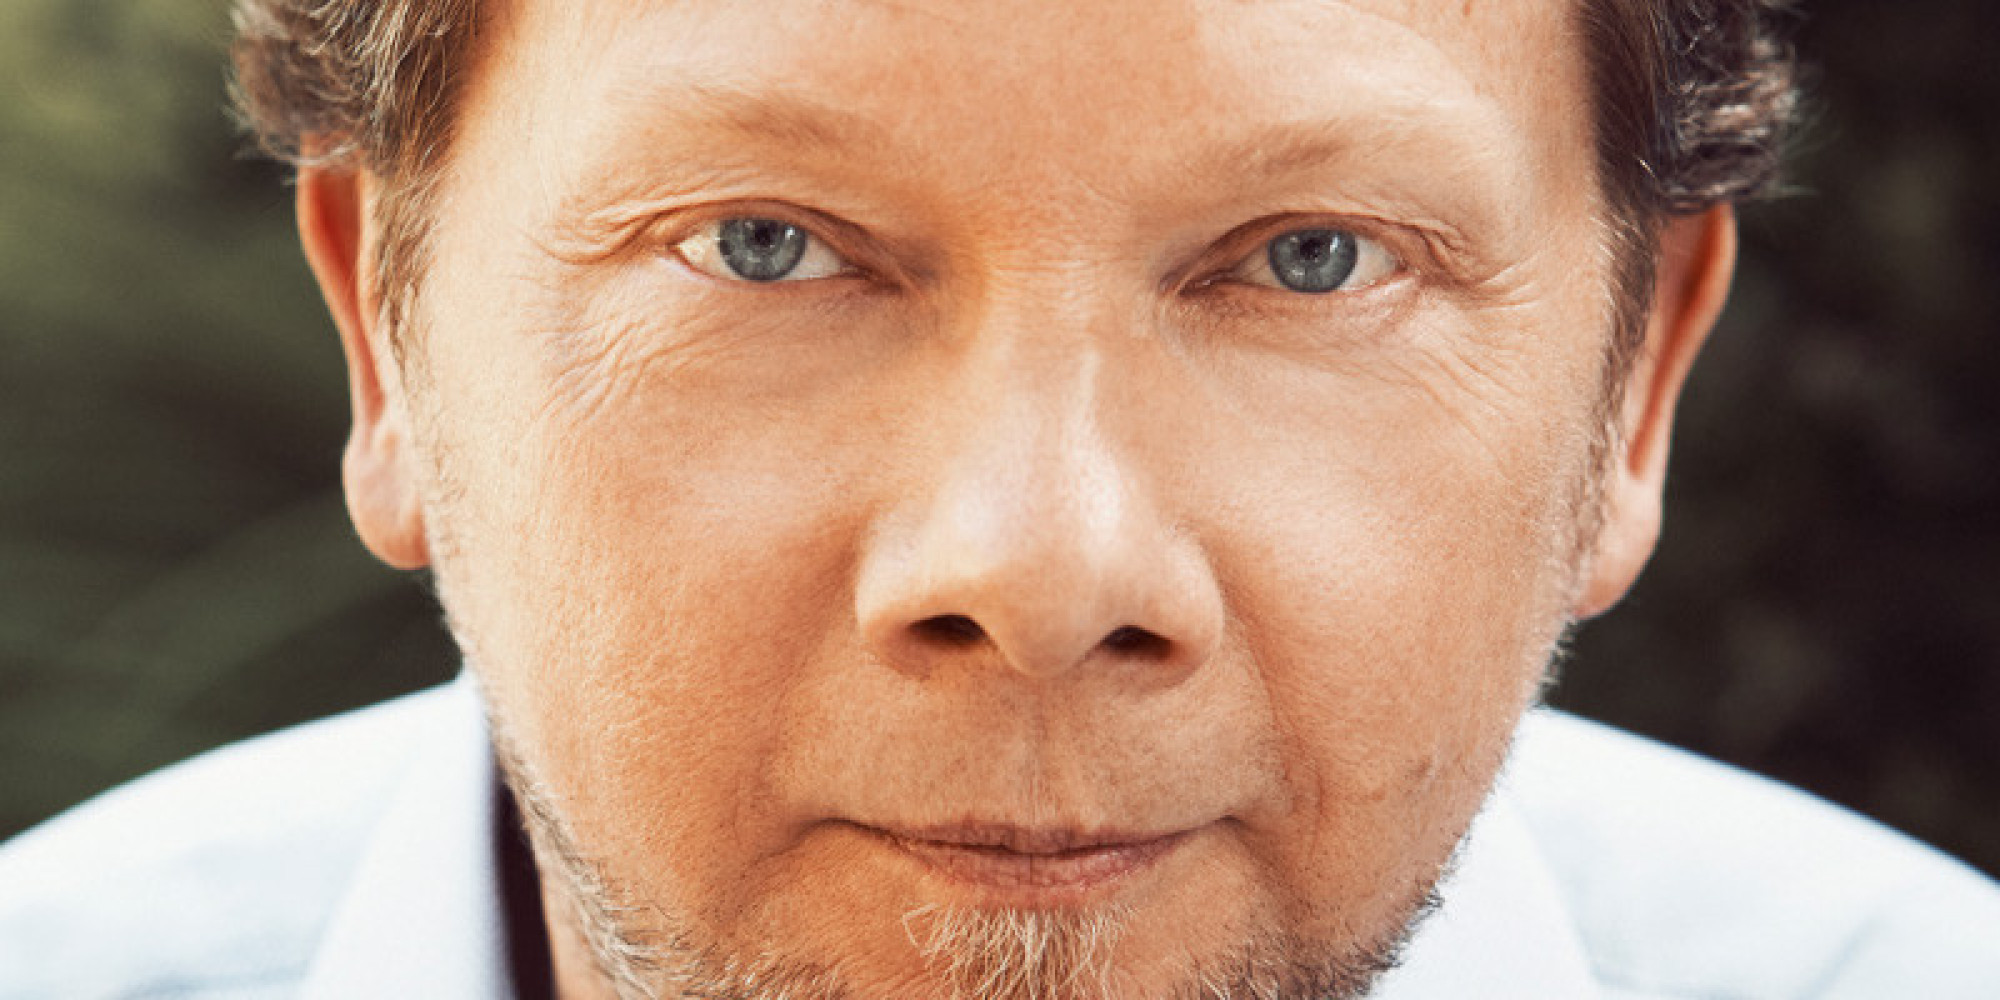 ECKHART-TOLLE - www.sustainable.media